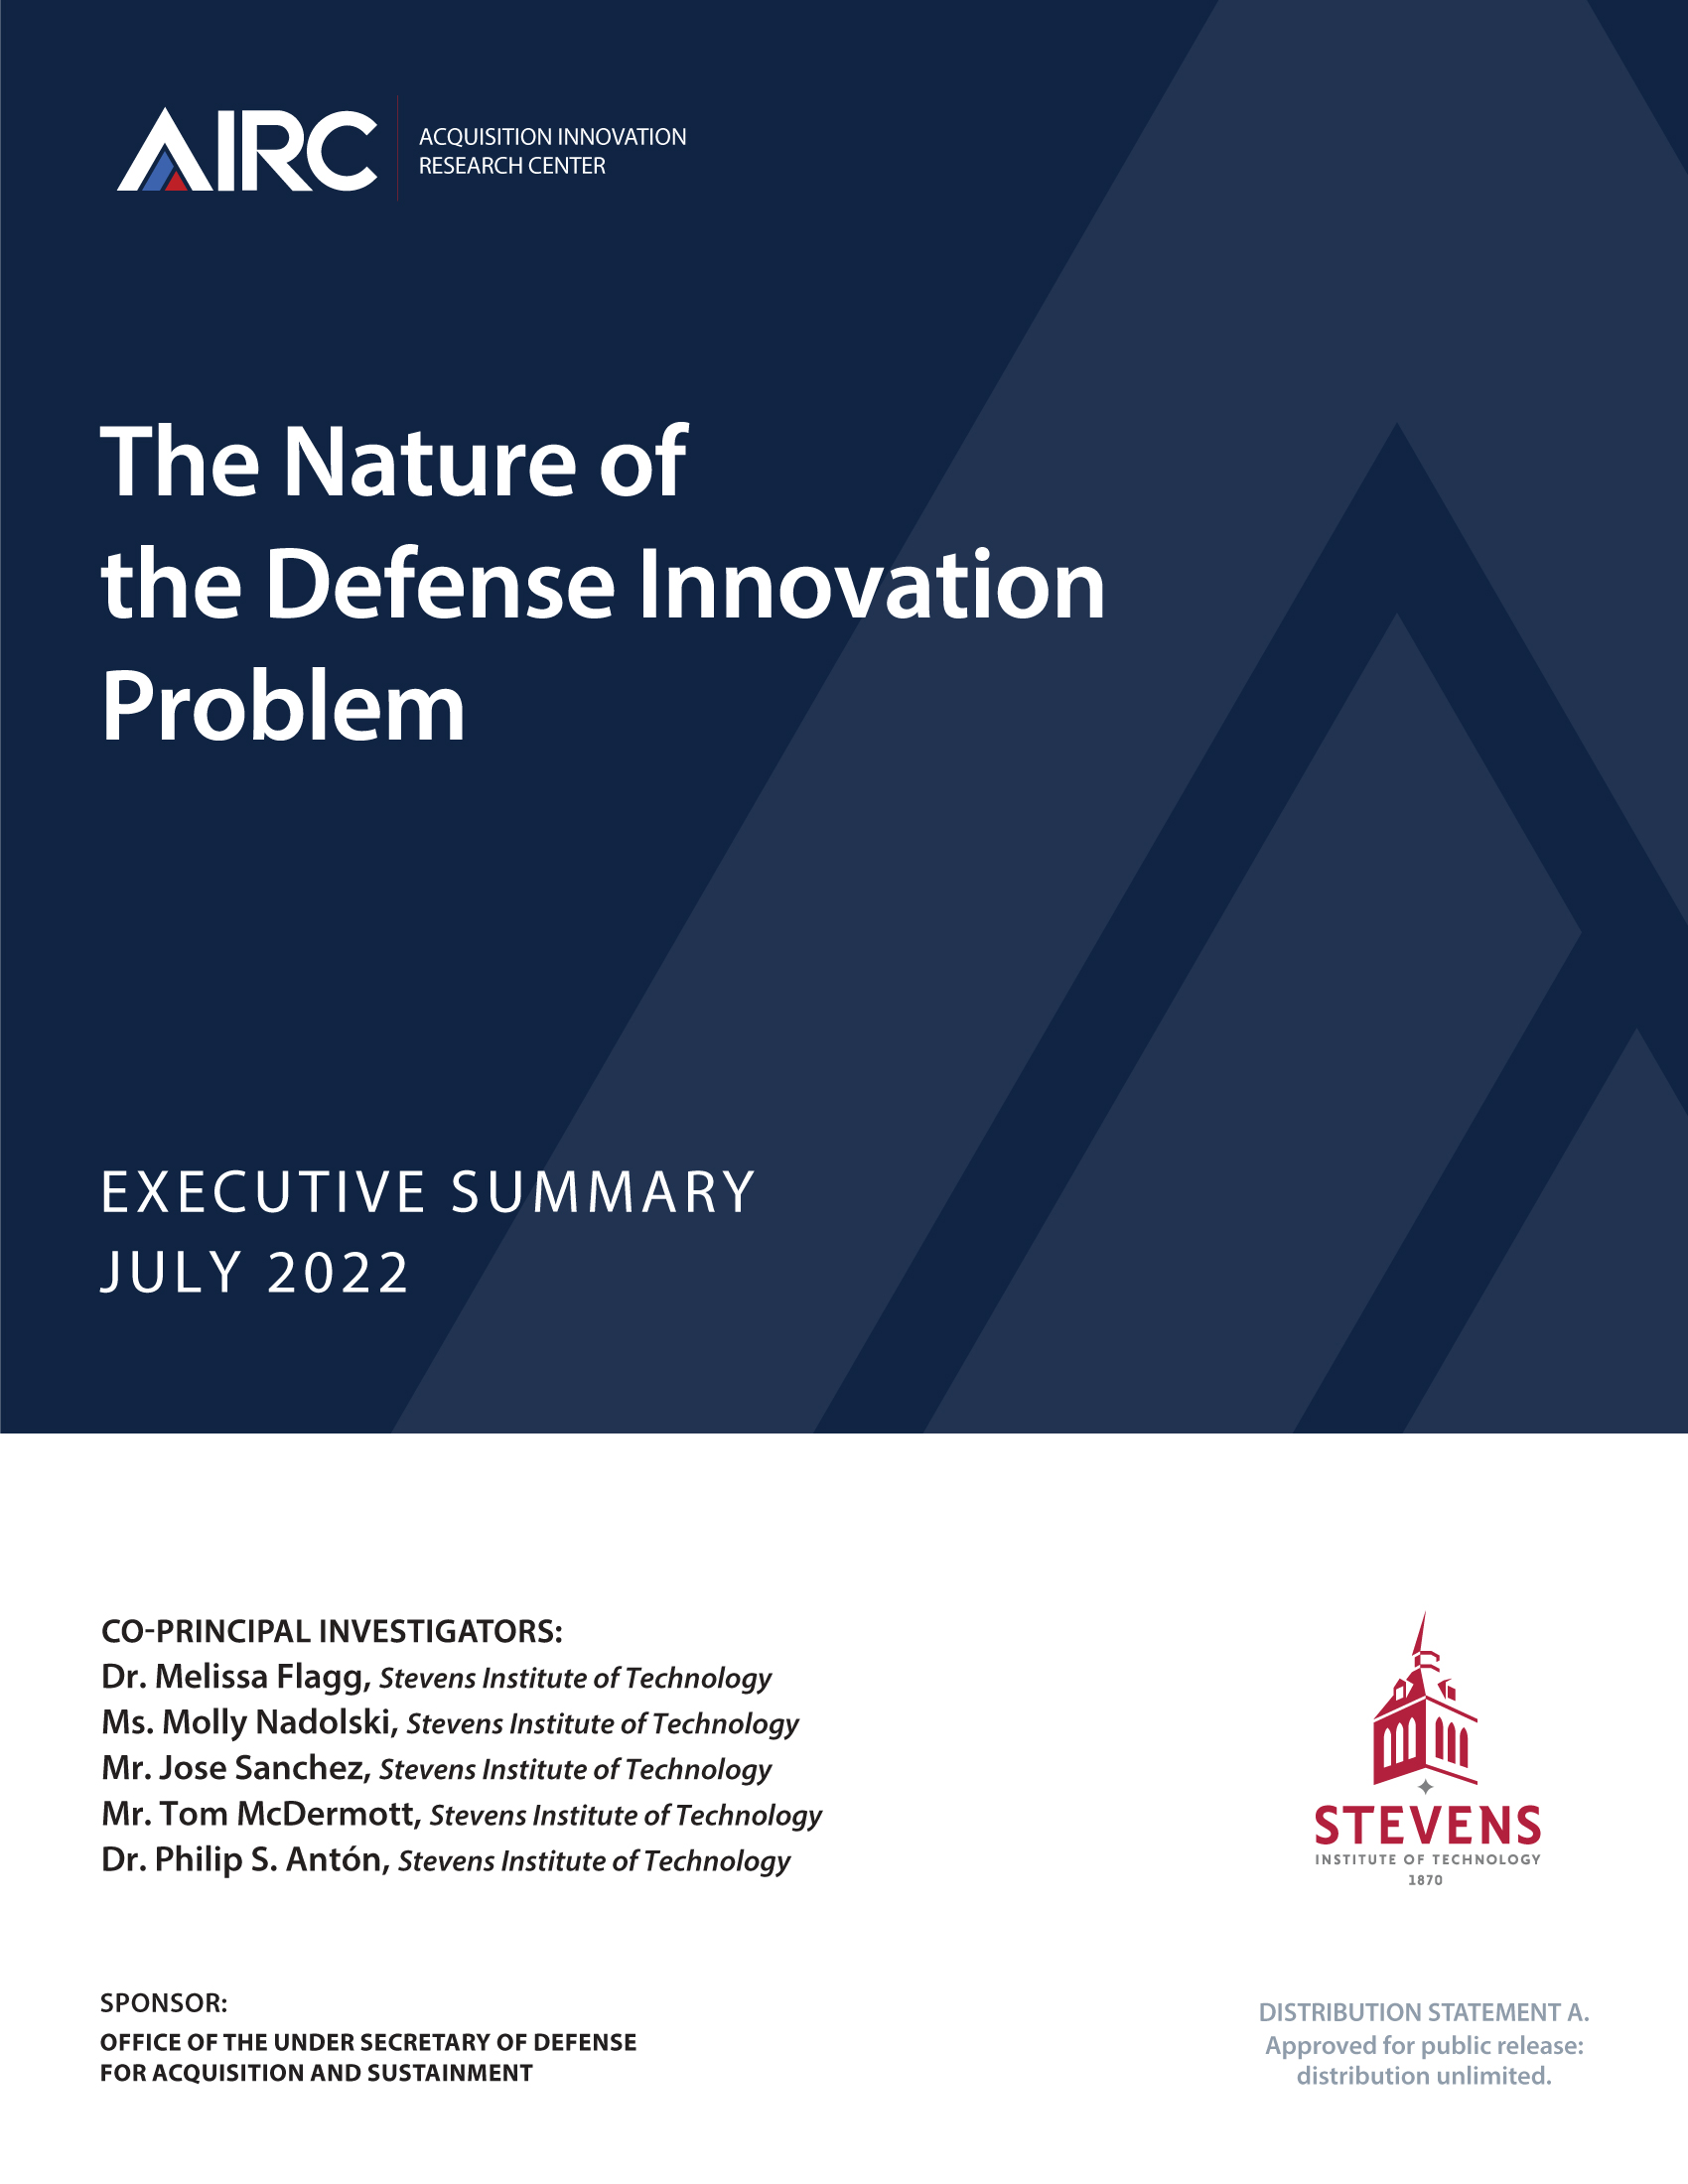 The Nature of the Defense Innovation Problem - The Acquisition Innovation  Research Center